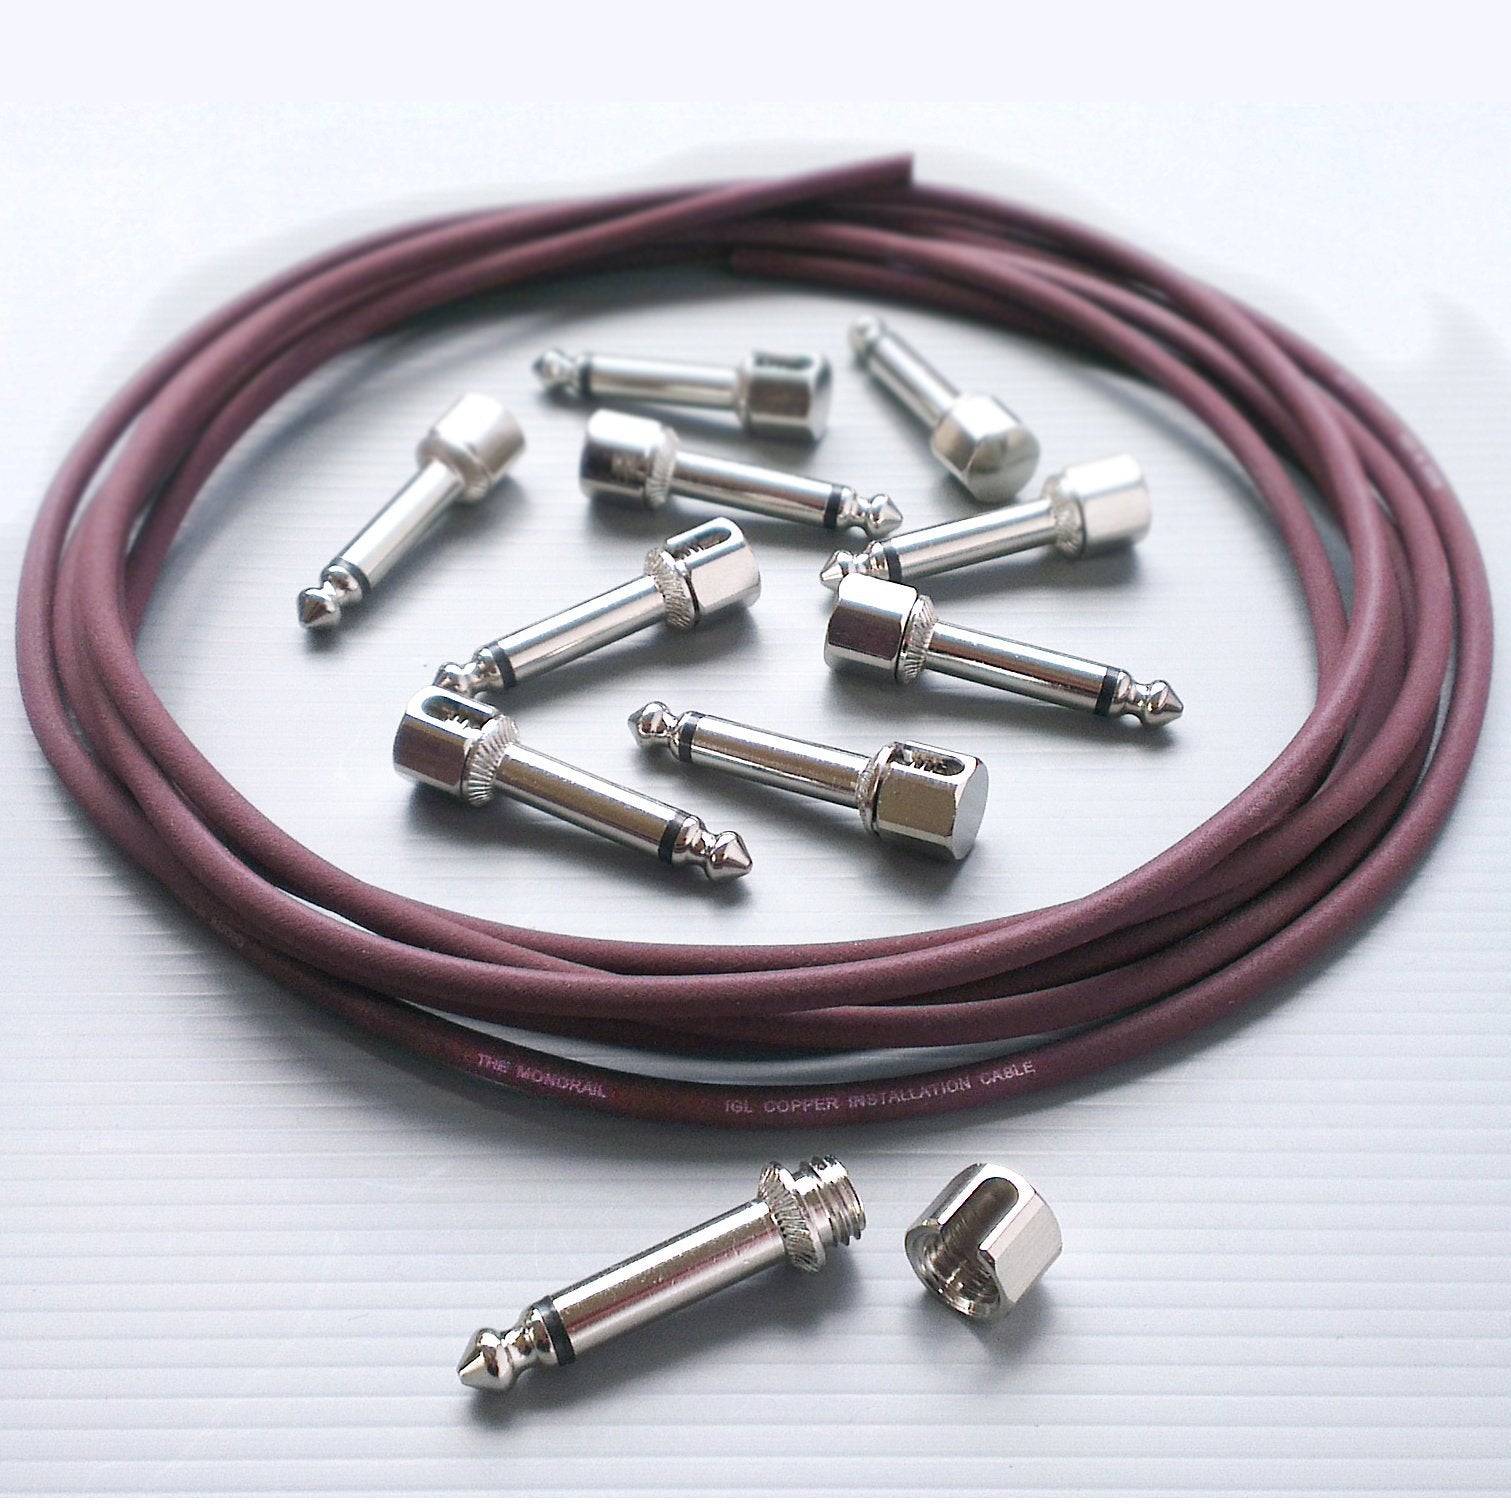 Evidence Audio Monorail Signal Cable Kit - 8 SIS R/A Plugs / 5' Cable